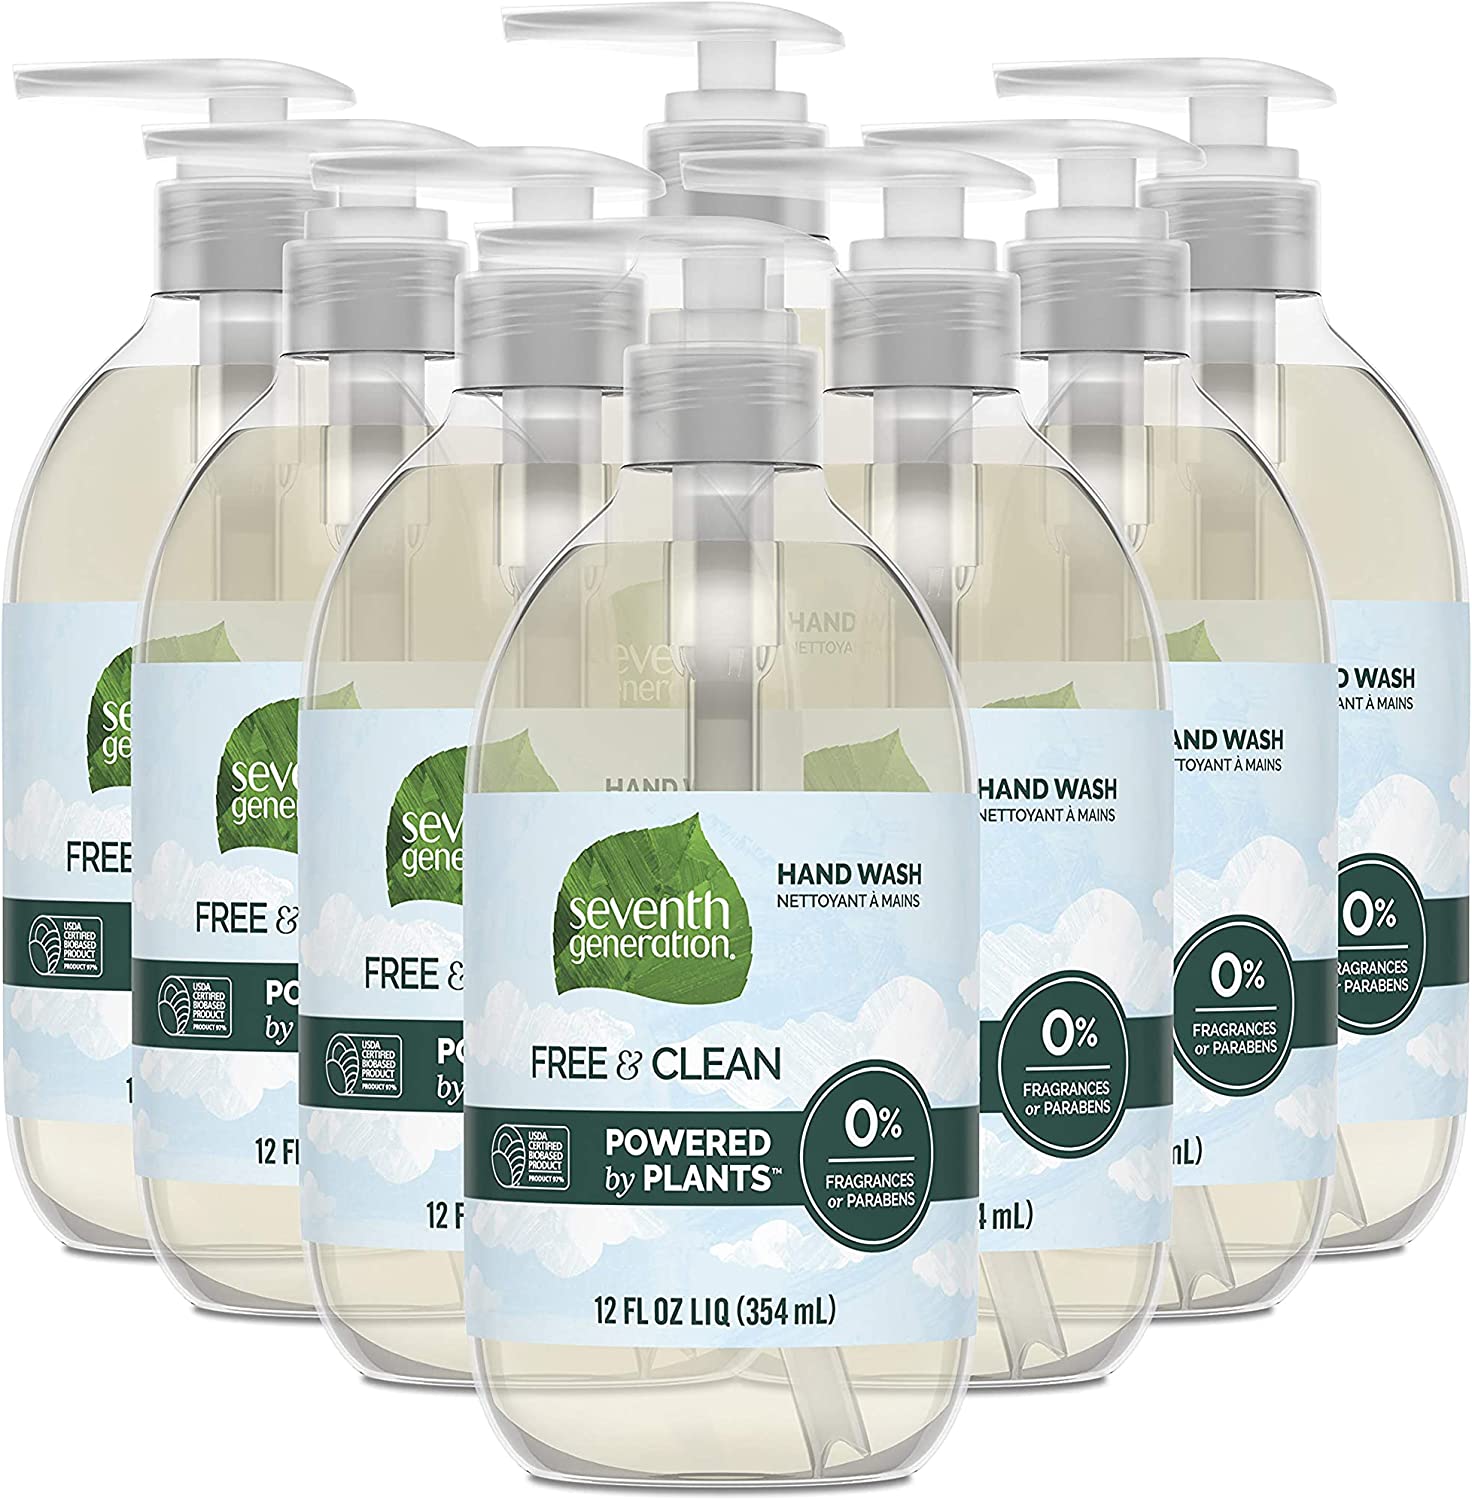 Seventh Generation Free & Clean Plant-Based Hand Soap, 8-Pack